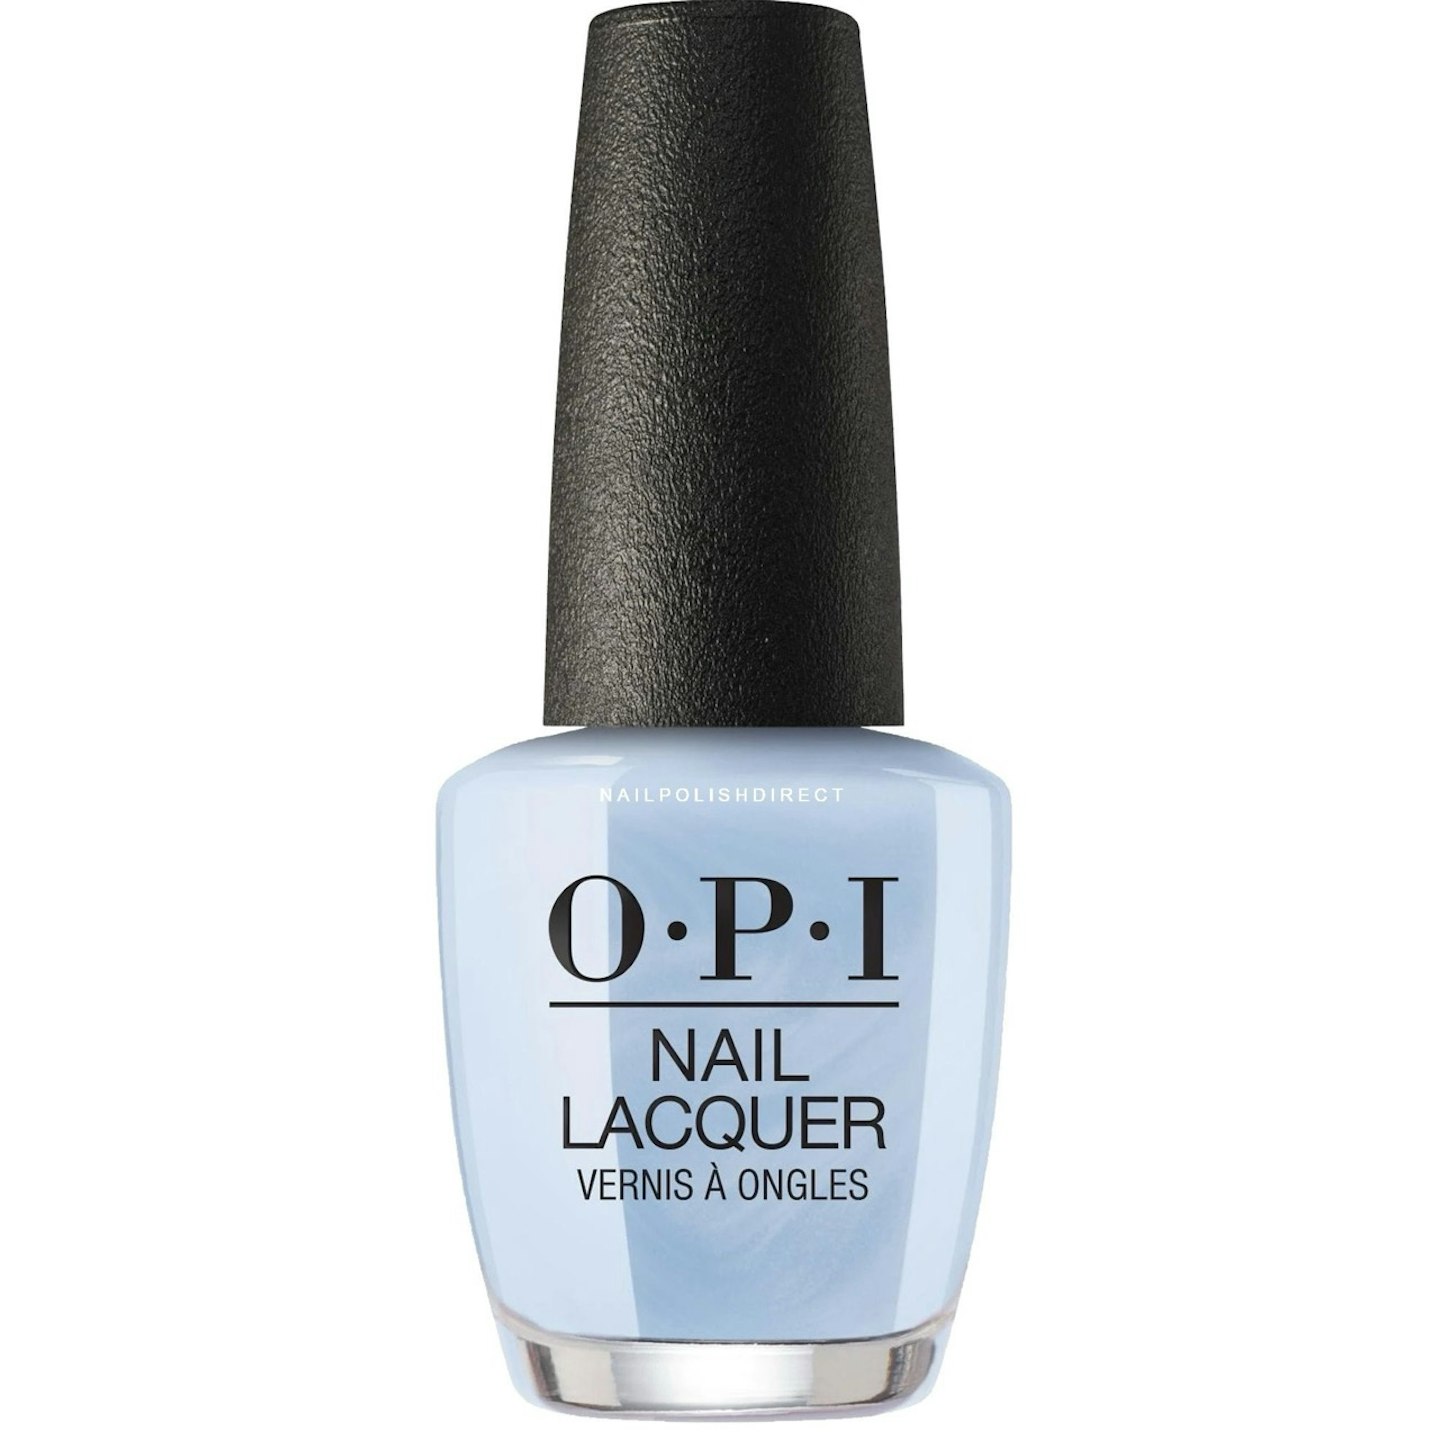 OPI Nail Lacquer in Did You See Those Mussels?